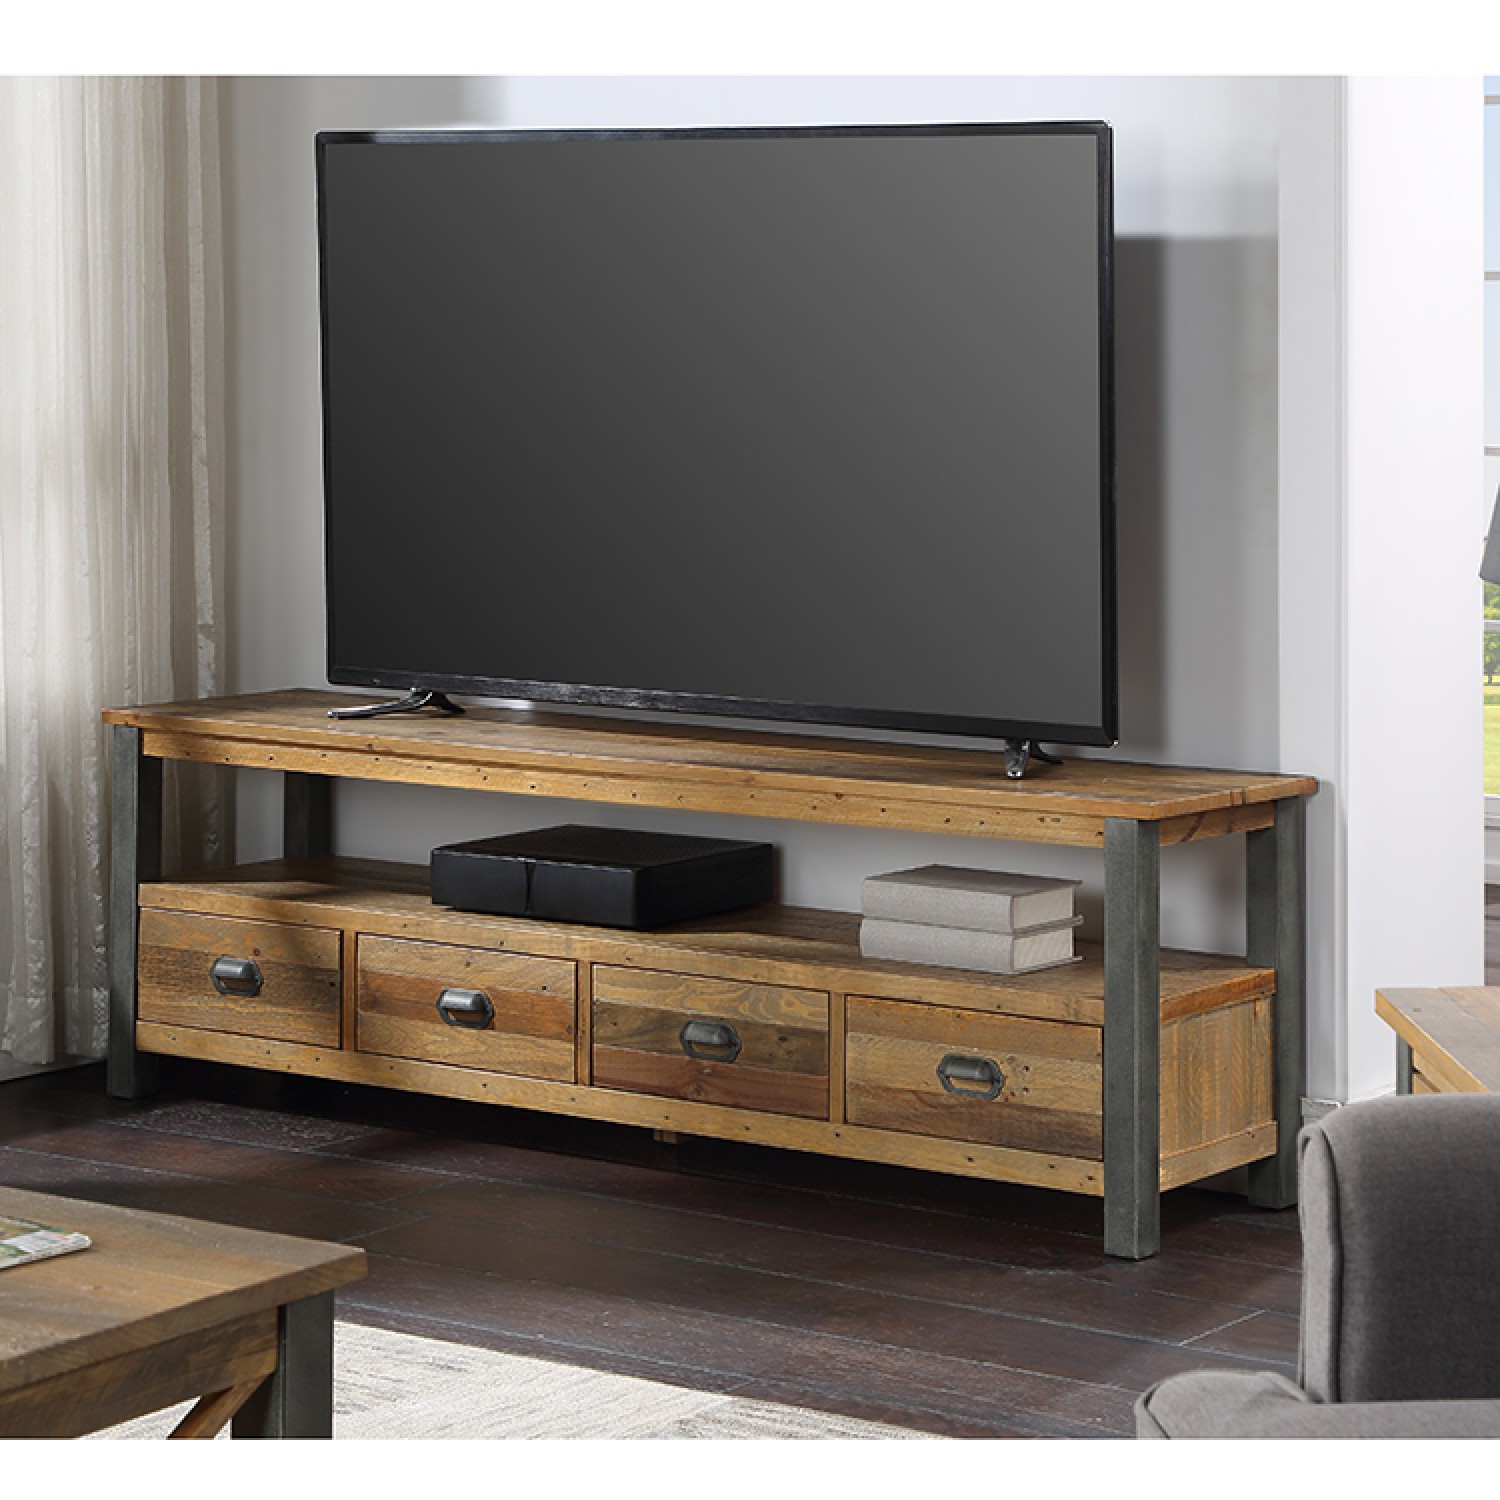 Details about   Home TV Cabinet Solid Reclaimed Wood Display Stand Entertainment Center Bedroom 